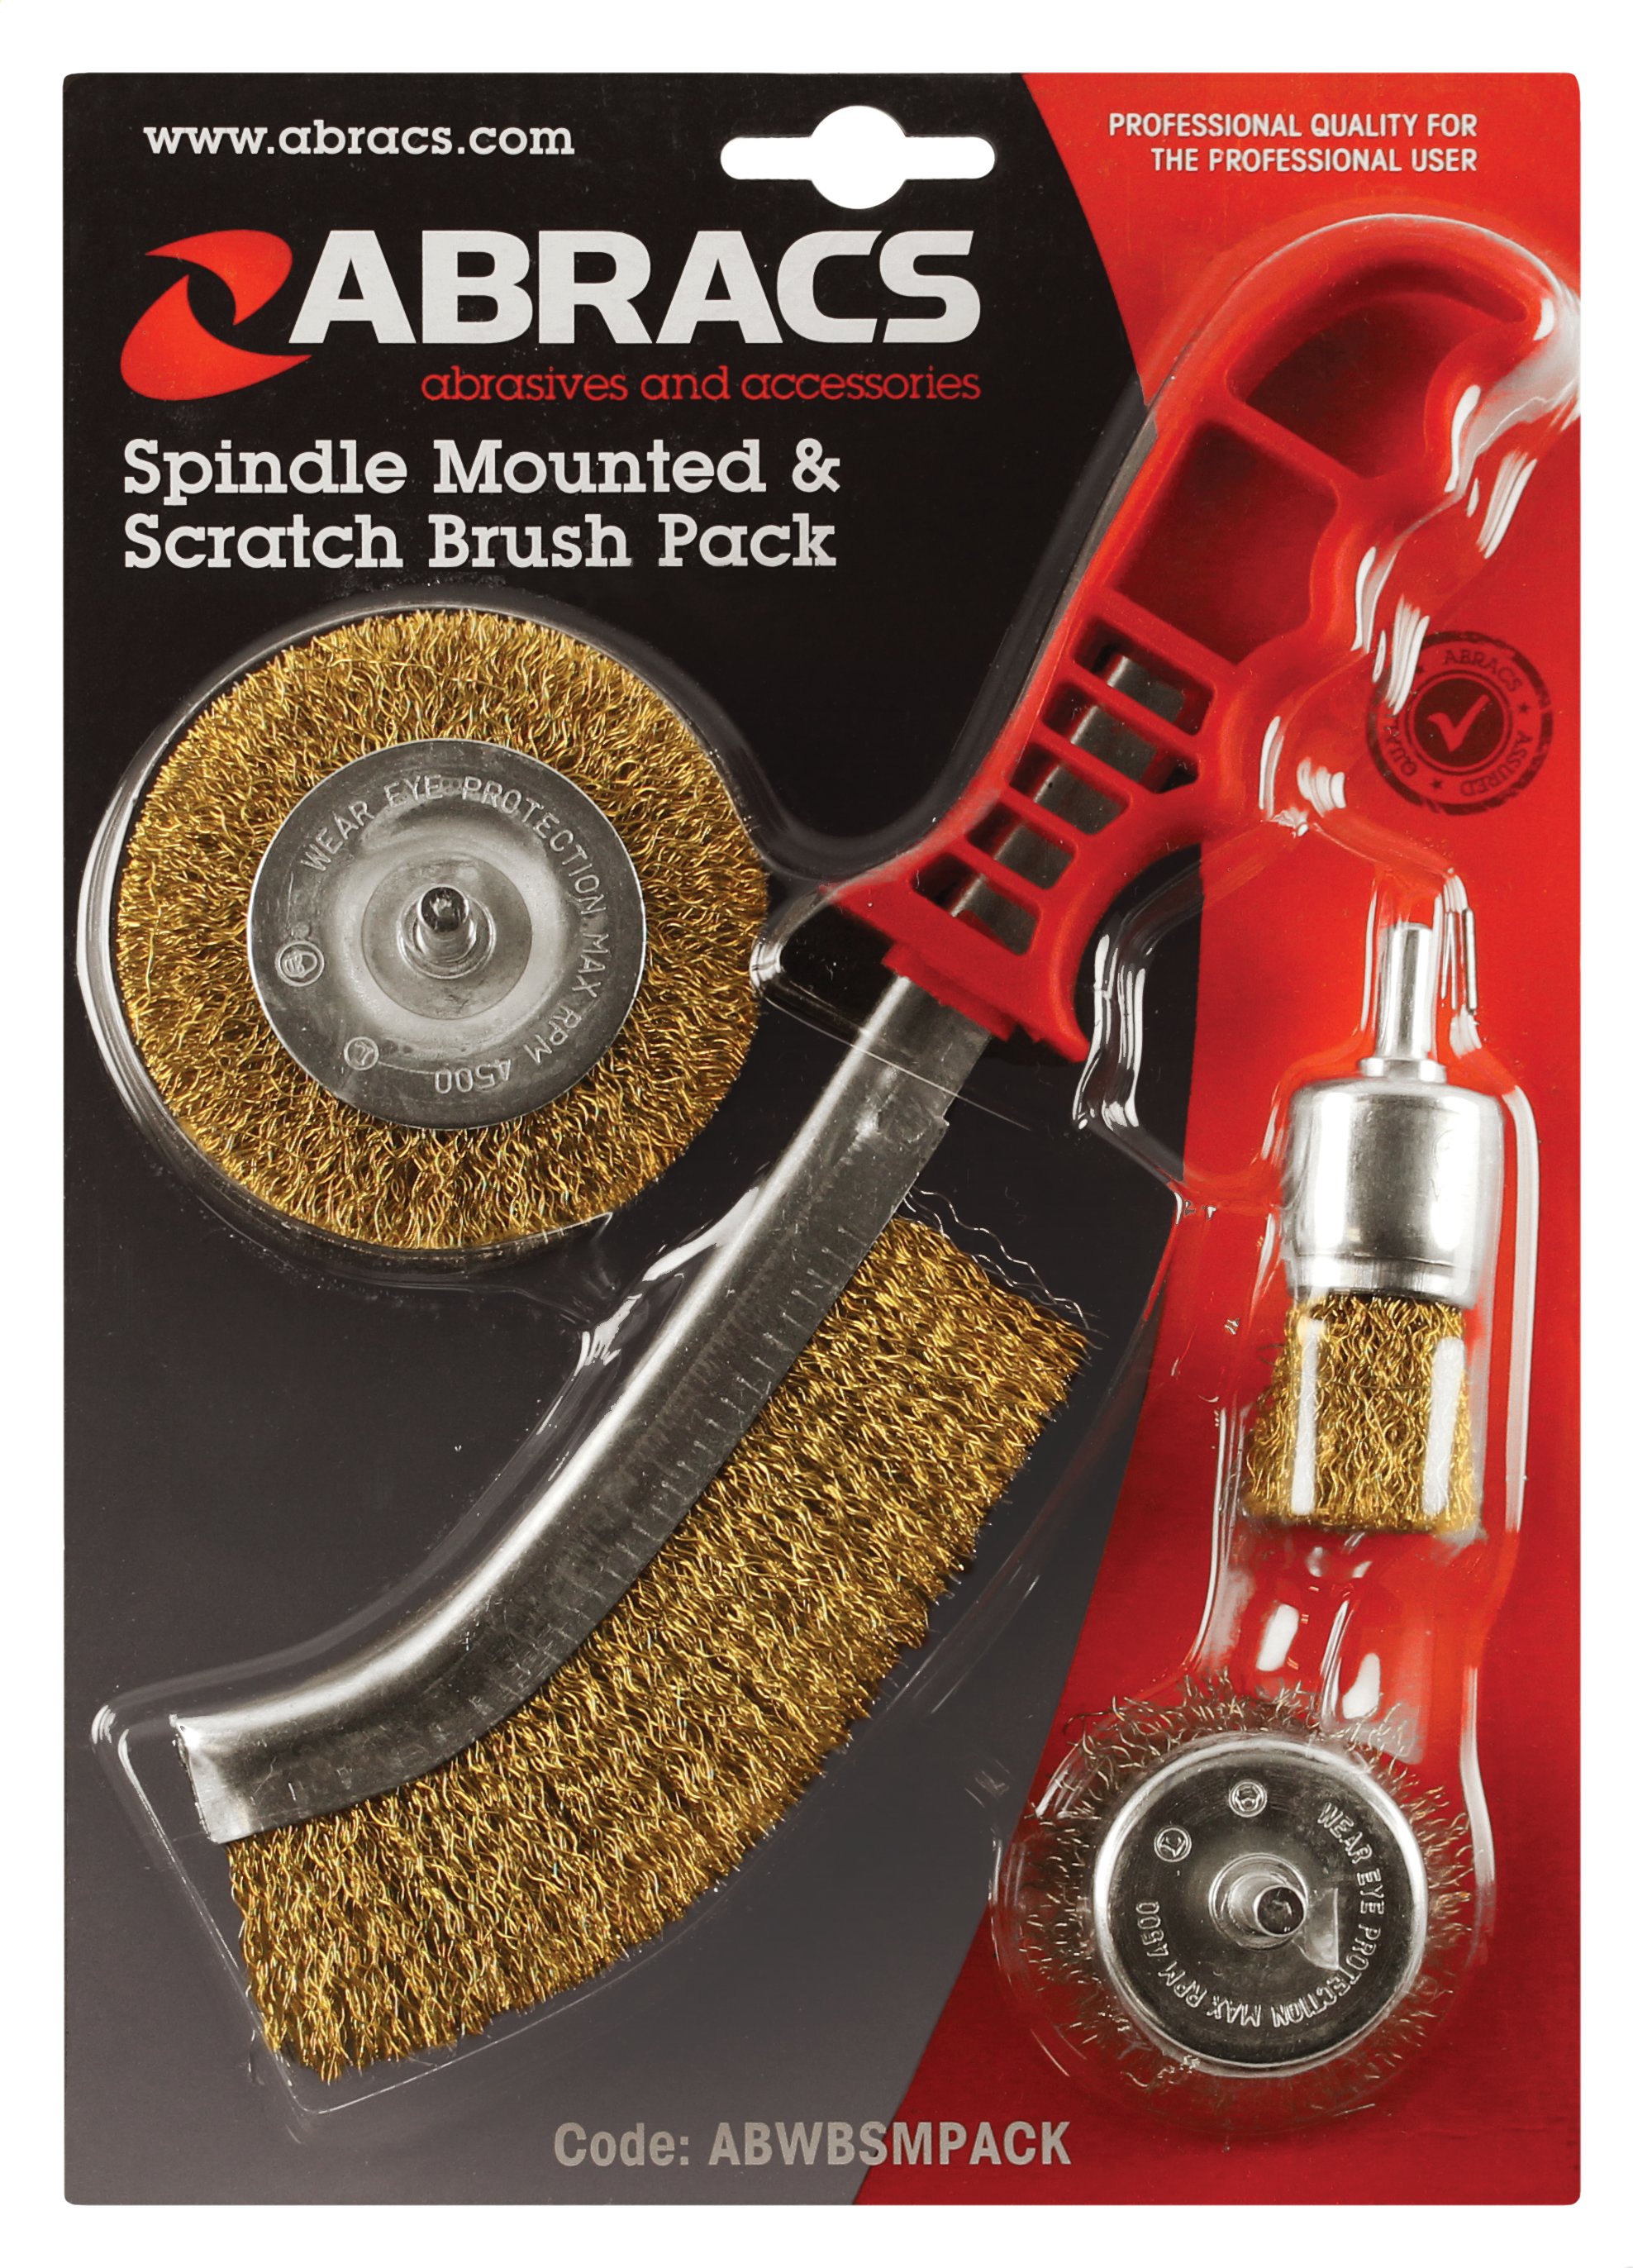 Abracs  SPINDLE MOUNTED & SCRATCH BRUSH PACK